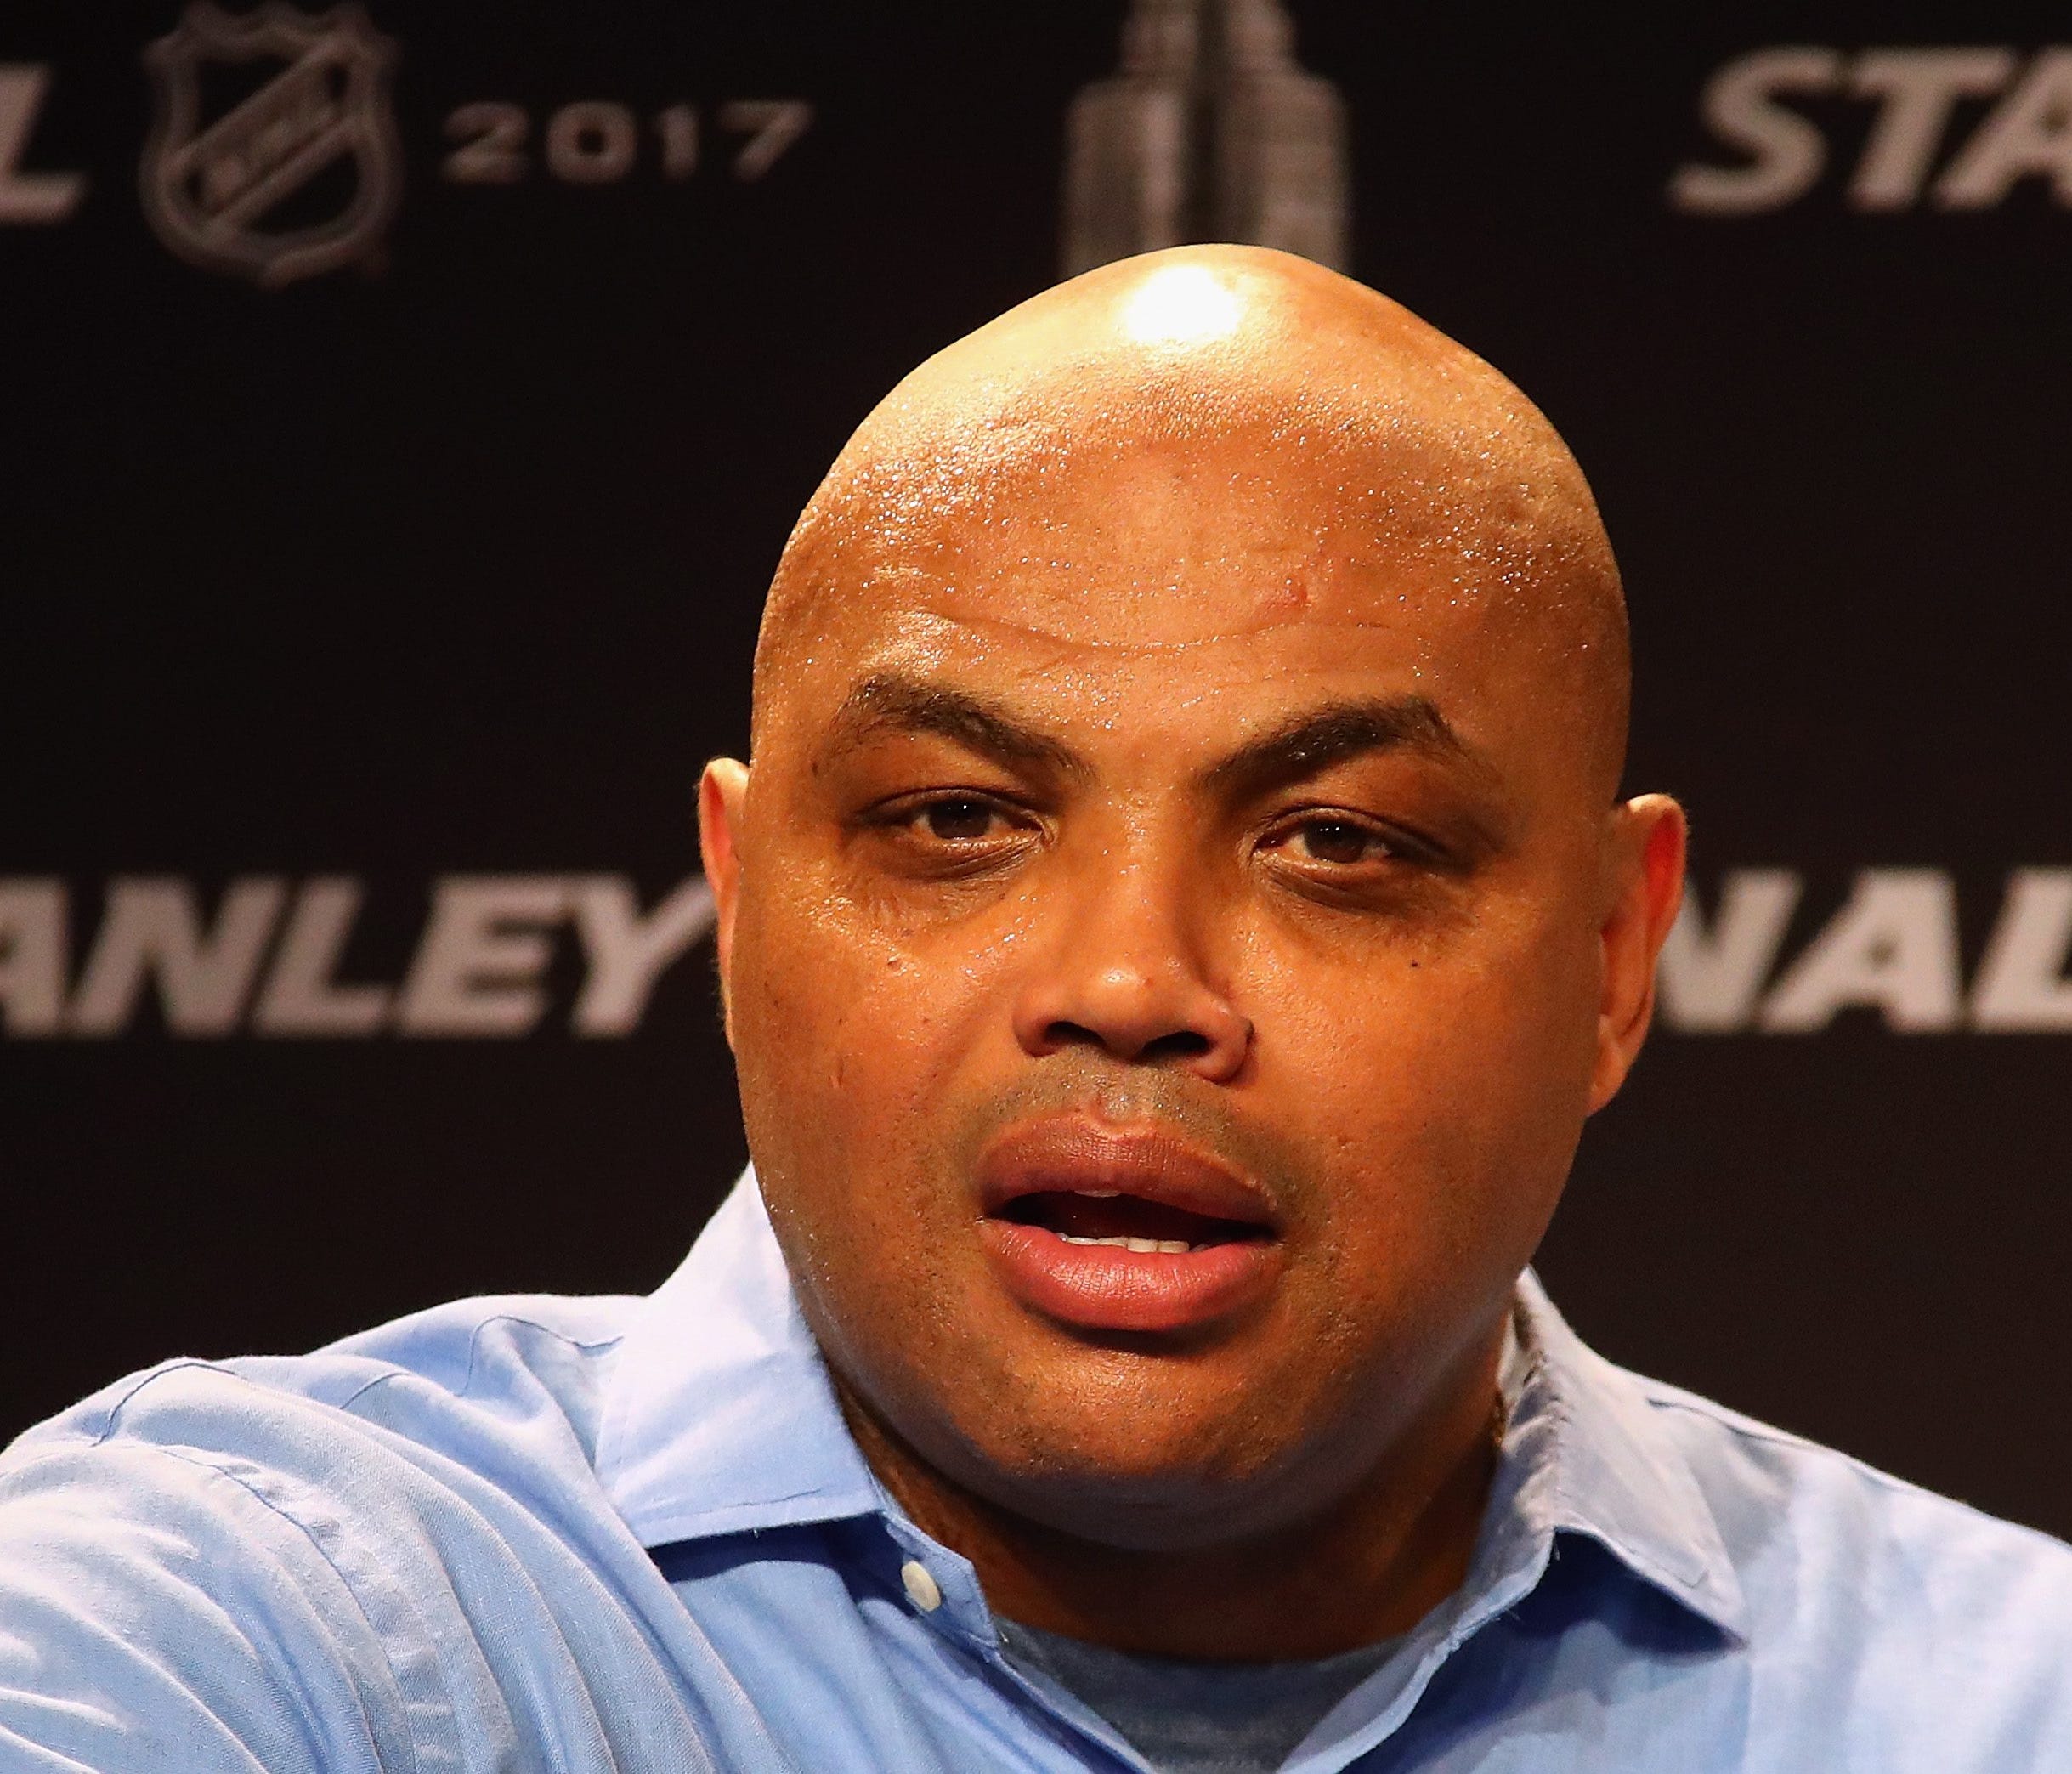 NASHVILLE, TN - JUNE 05:  Former NBA player Charles Barkley speaks during a press conference prior to Game Four of the 2017 NHL Stanley Cup Final between the Pittsburgh Penguins and the Nashville Predators at the Bridgestone Arena on June 5, 2017 in 